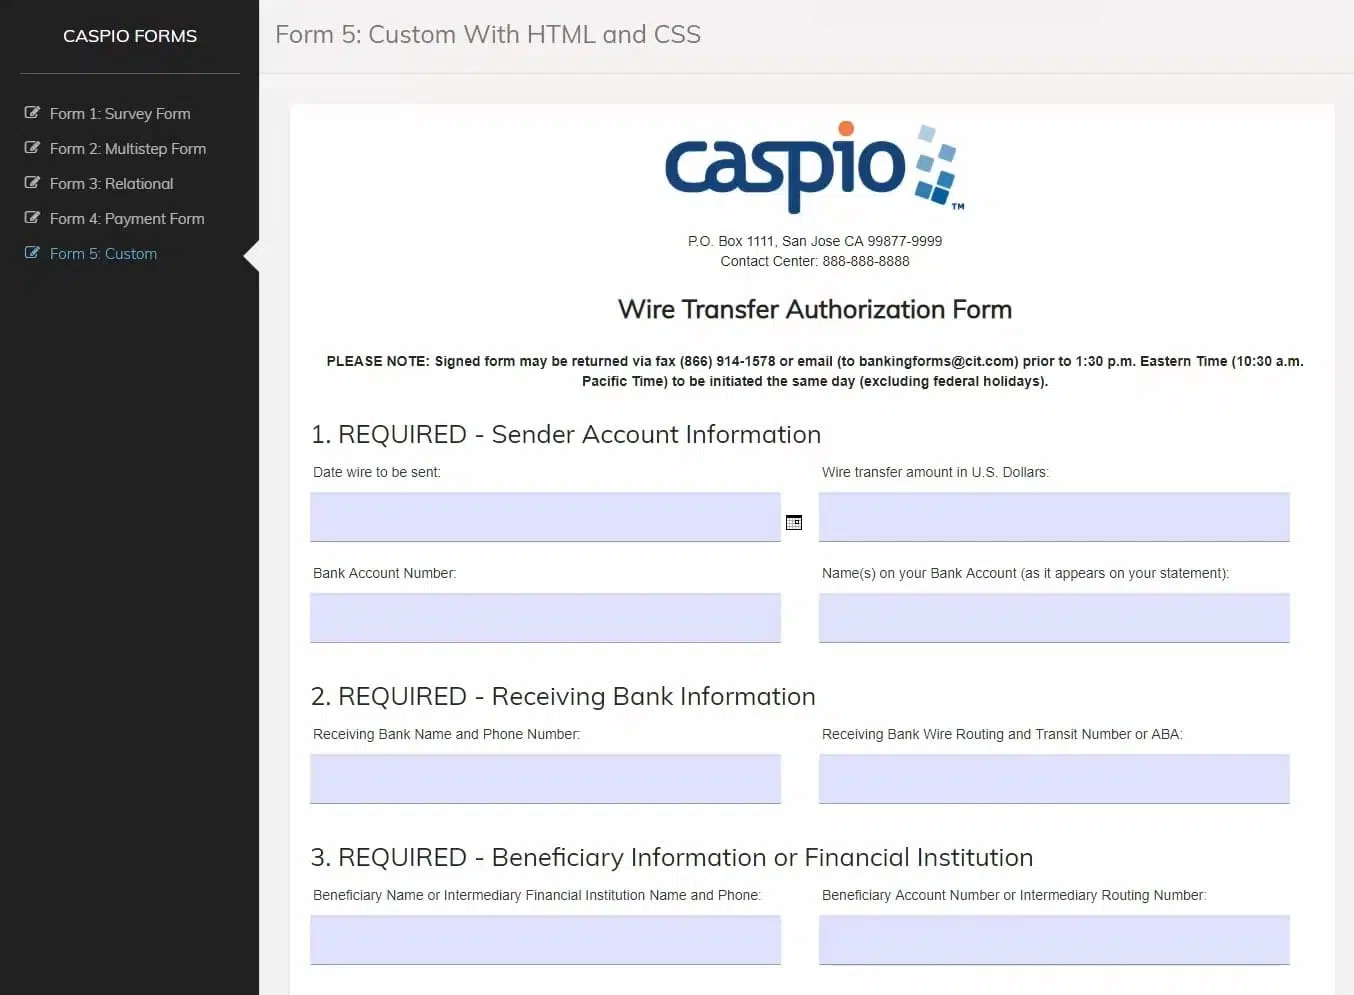 Screenshot of a sample completed “Book a Meeting Room” form made on Caspio.